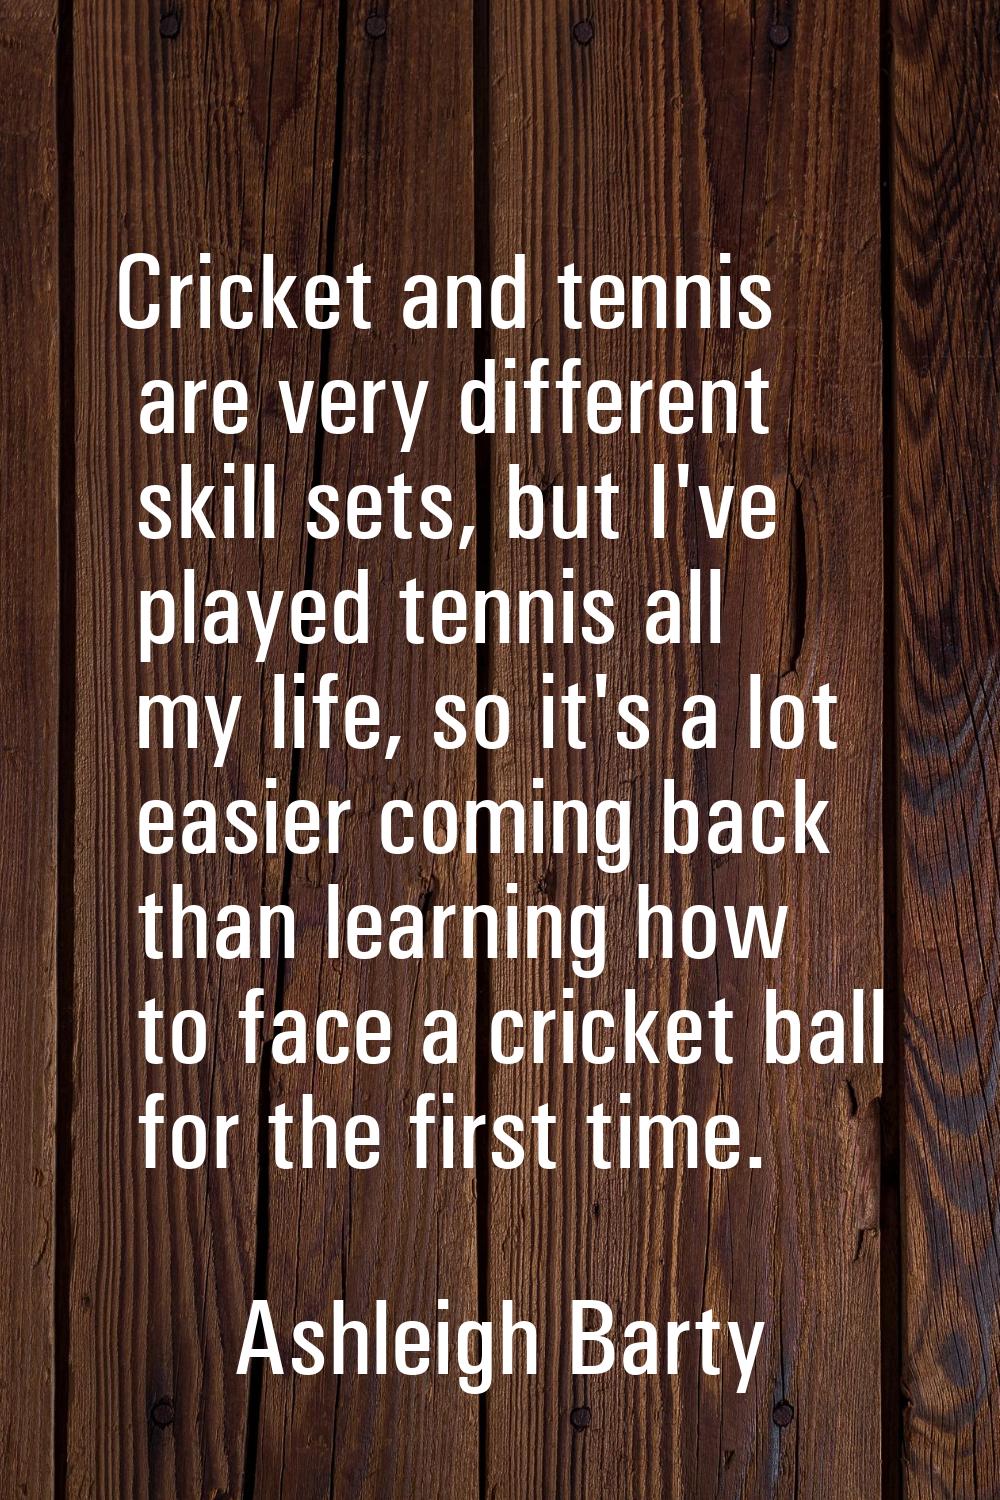 Cricket and tennis are very different skill sets, but I've played tennis all my life, so it's a lot